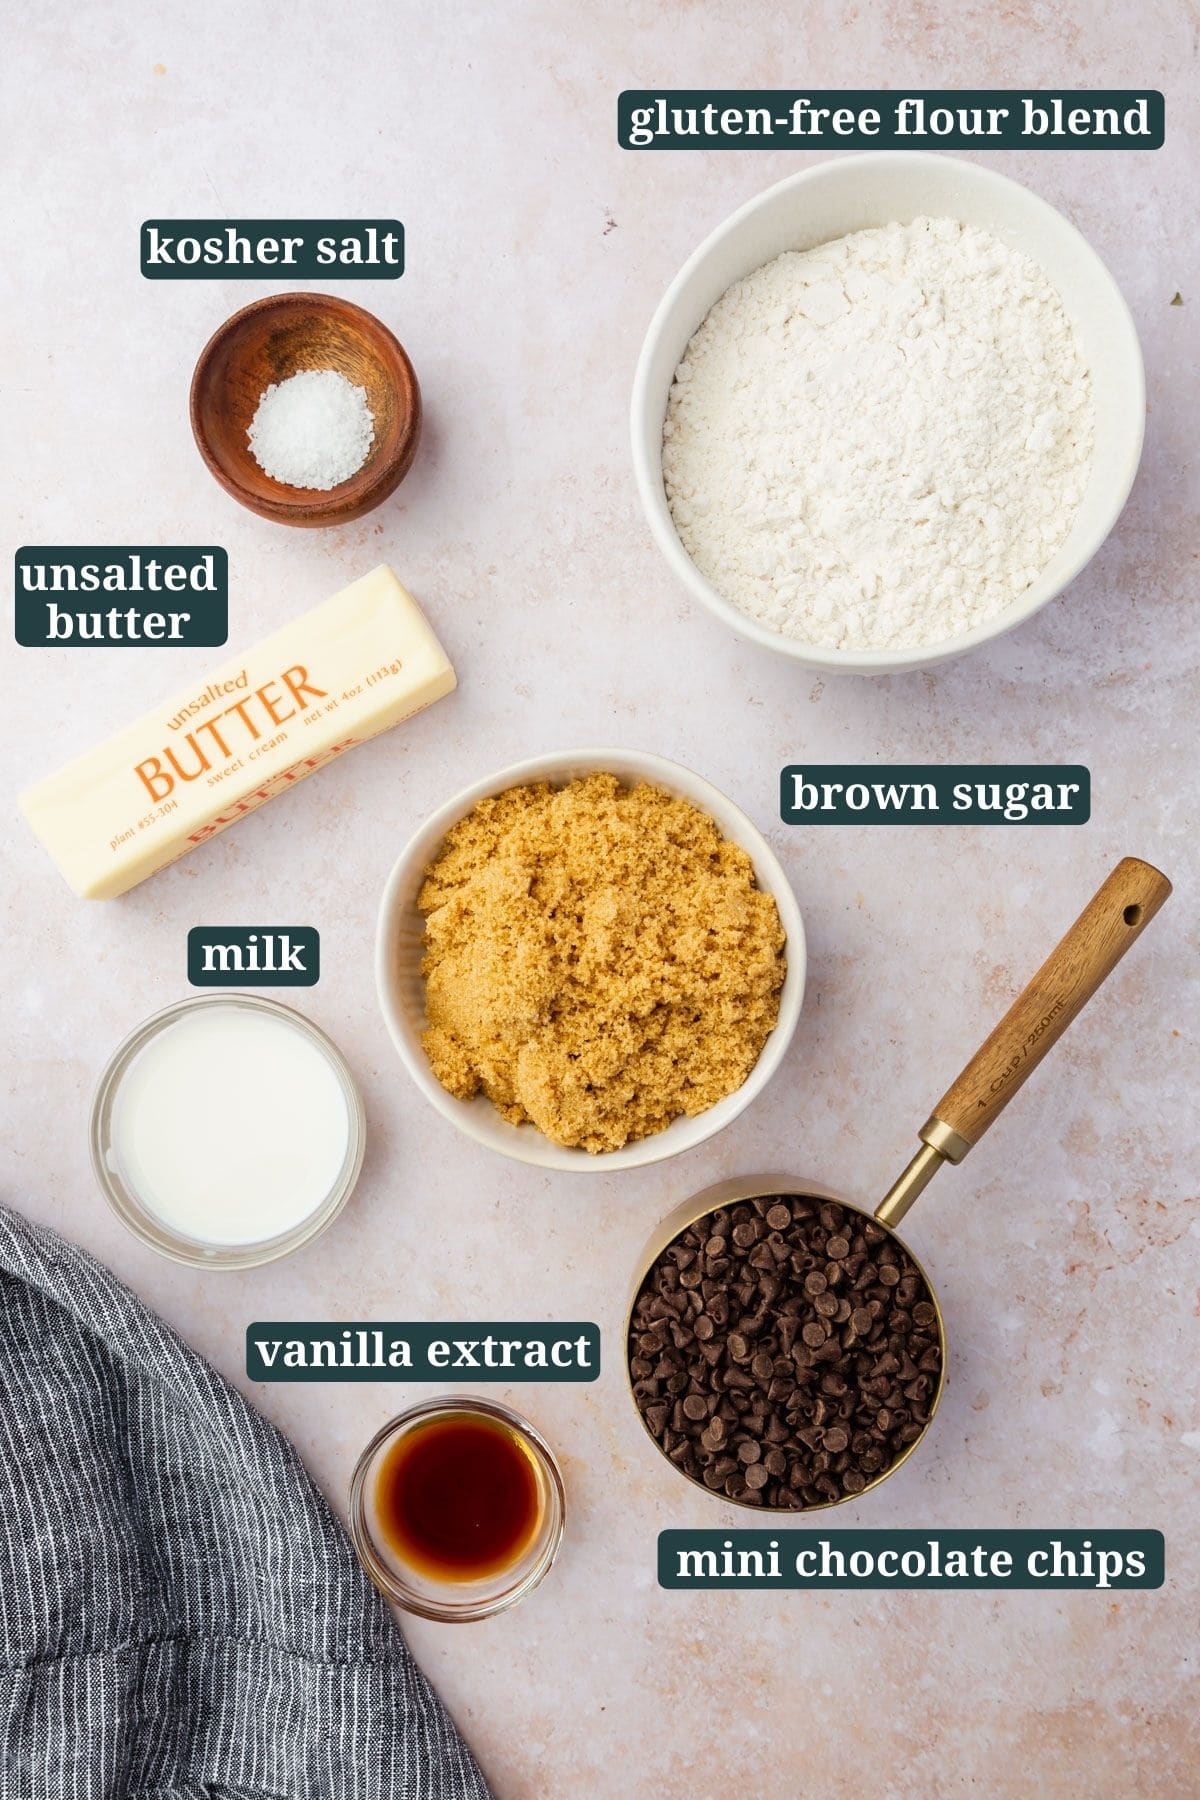 Ingredients for making gluten-free edible cookie dough.